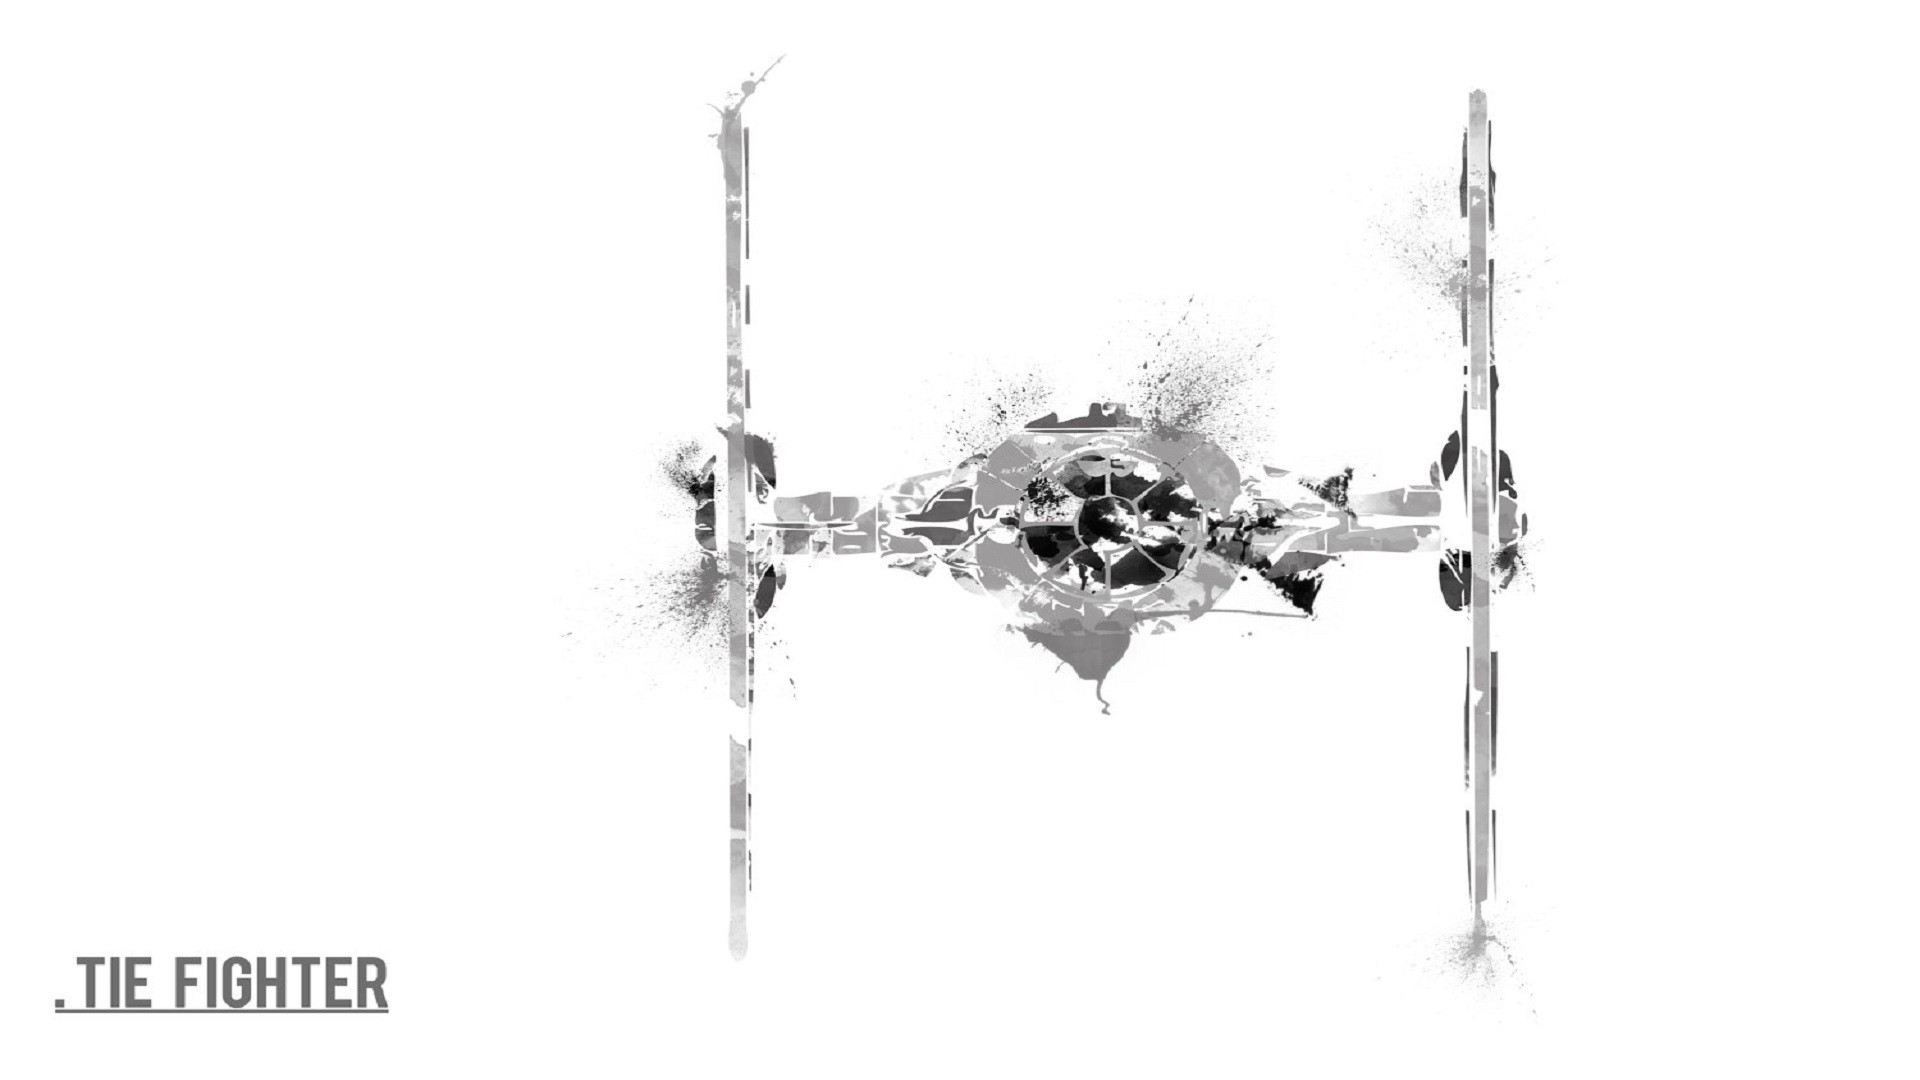 General 1920x1080 Star Wars TIE Fighter simple background digital art white background spaceship Imperial Forces Star Wars Ships artwork science fiction